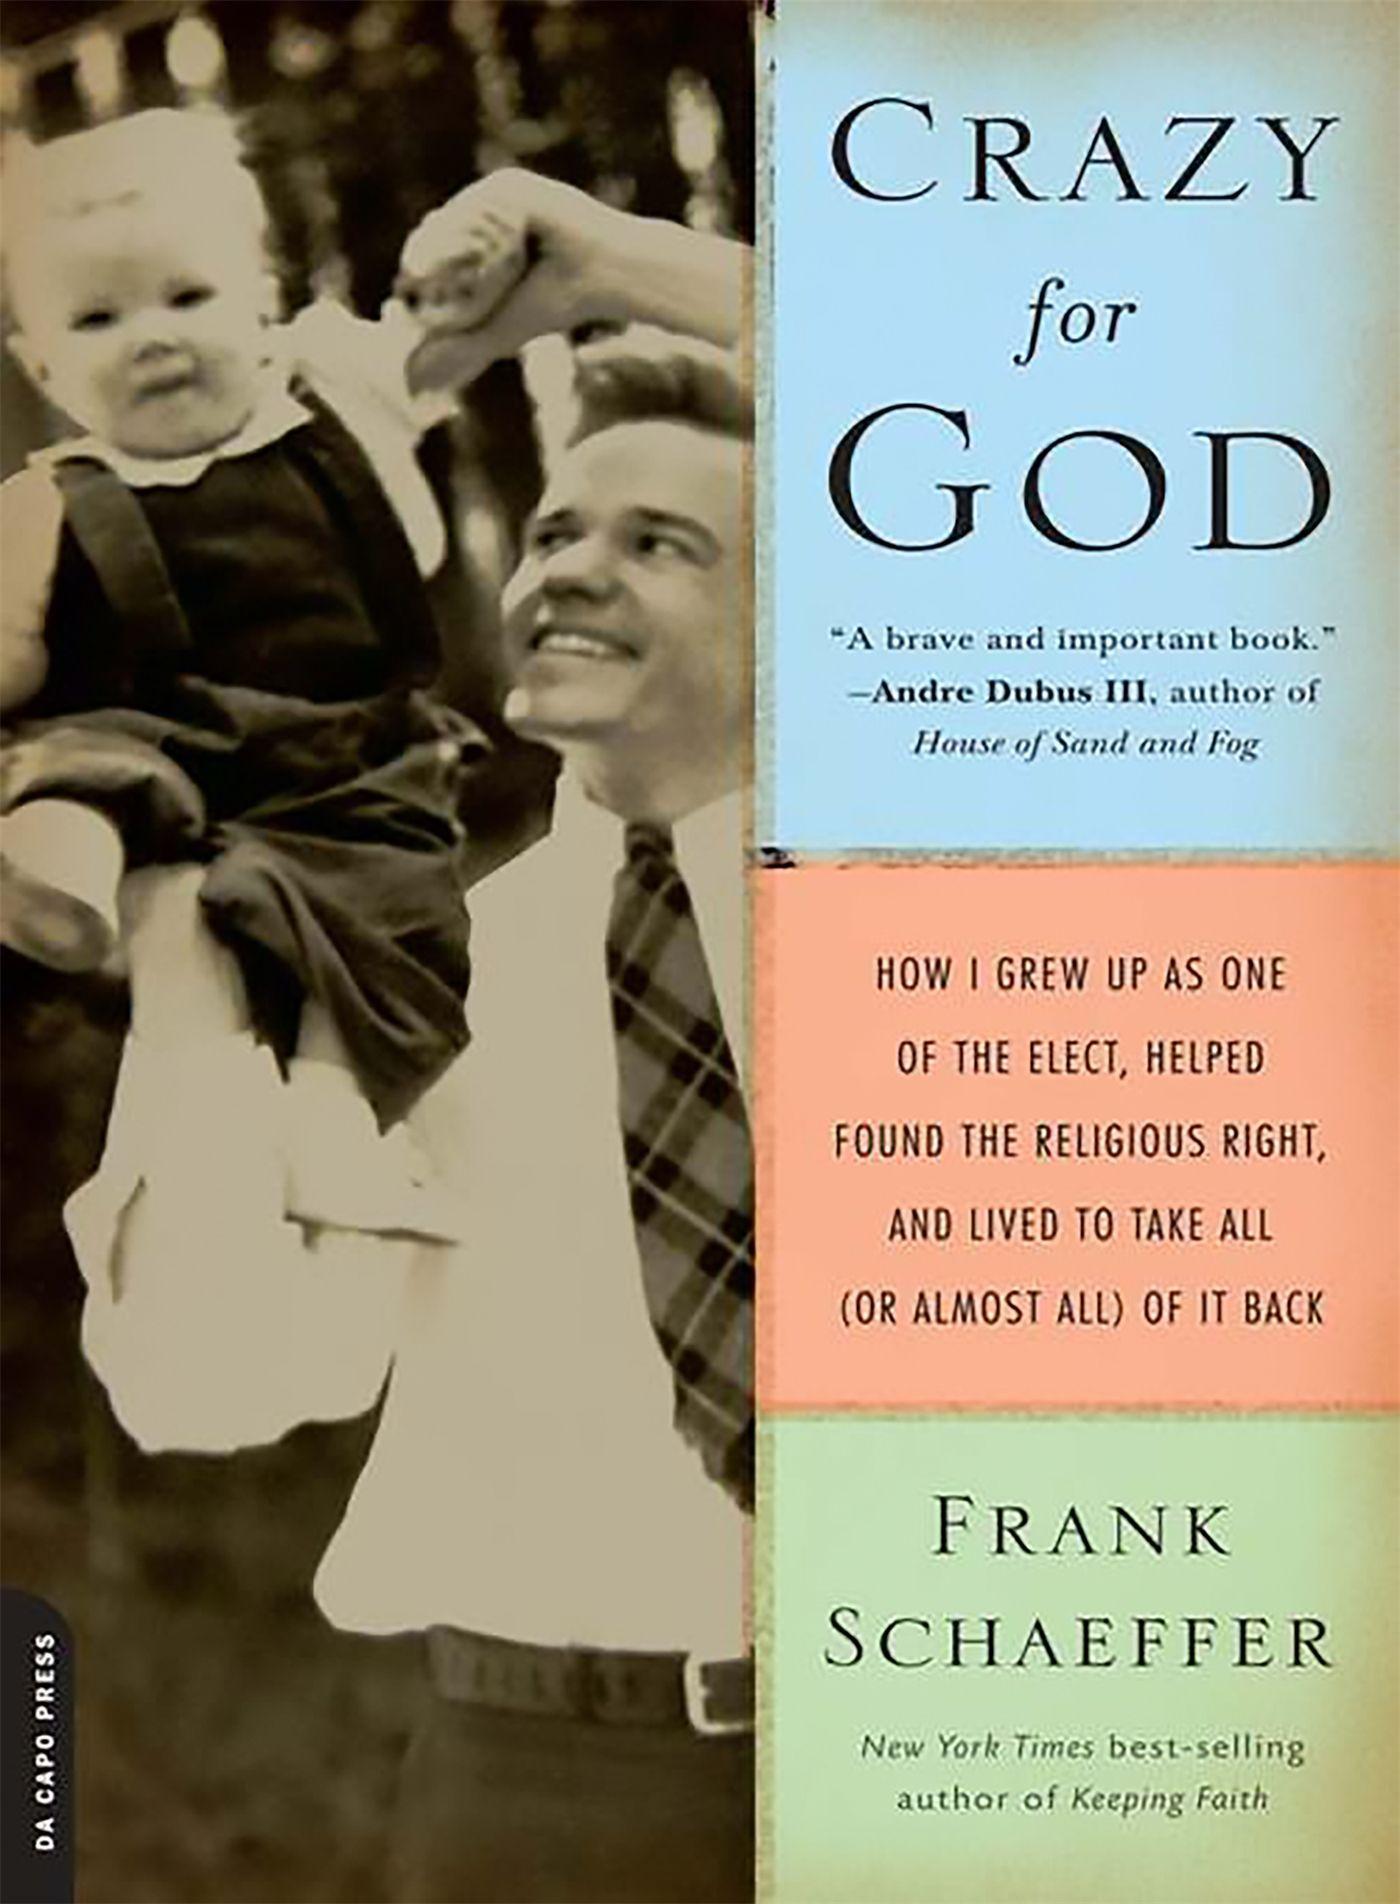 Crazy for God / How I Grew Up as One of the Elect, Helped Found the Religious Right, and Lived to Take All (or Almost All) of It Back / Frank Schaeffer / Taschenbuch / Kartoniert / Broschiert / 2008 - Schaeffer, Frank